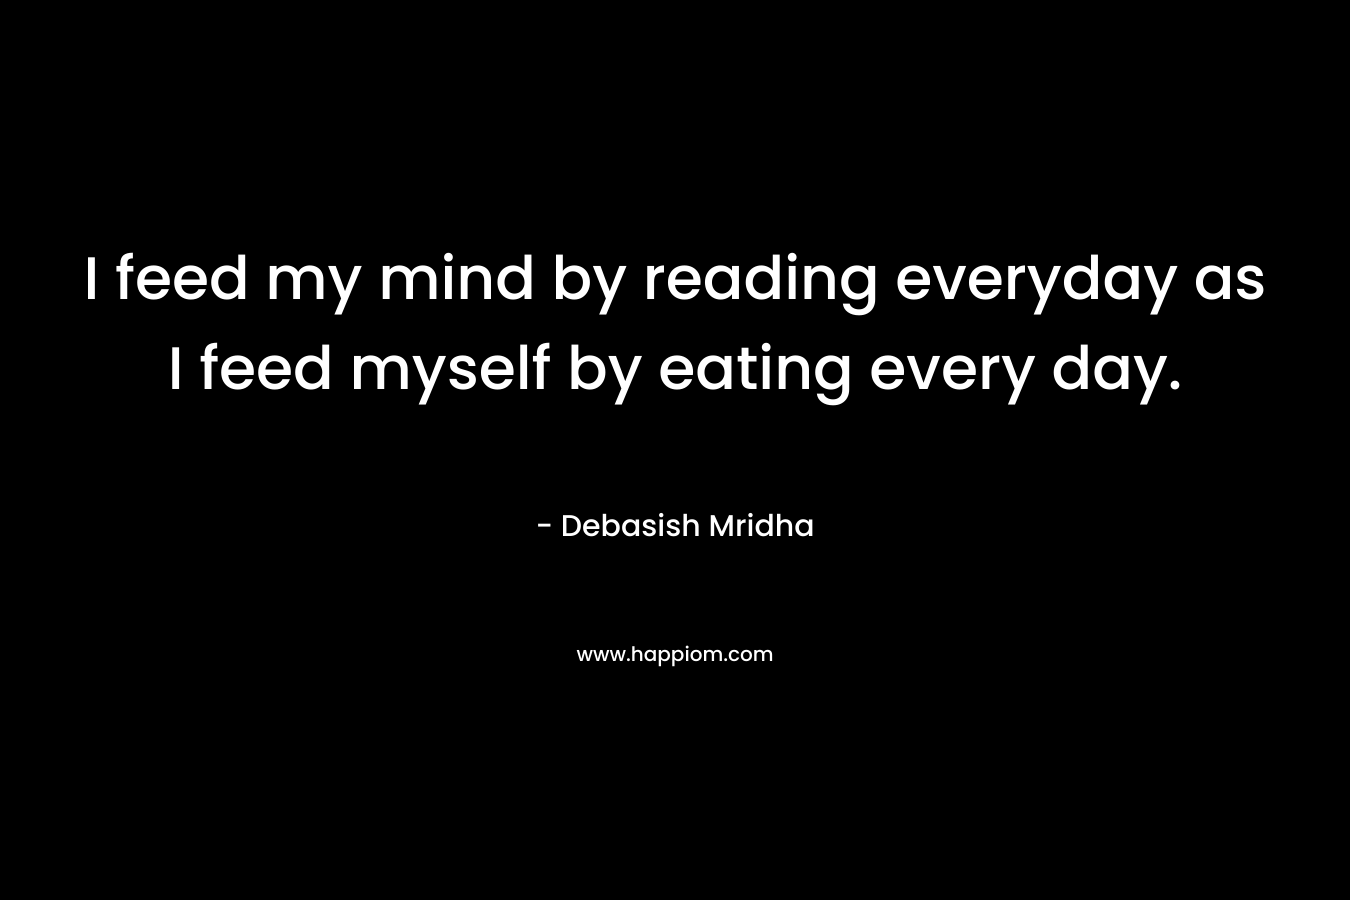 I feed my mind by reading everyday as I feed myself by eating every day.